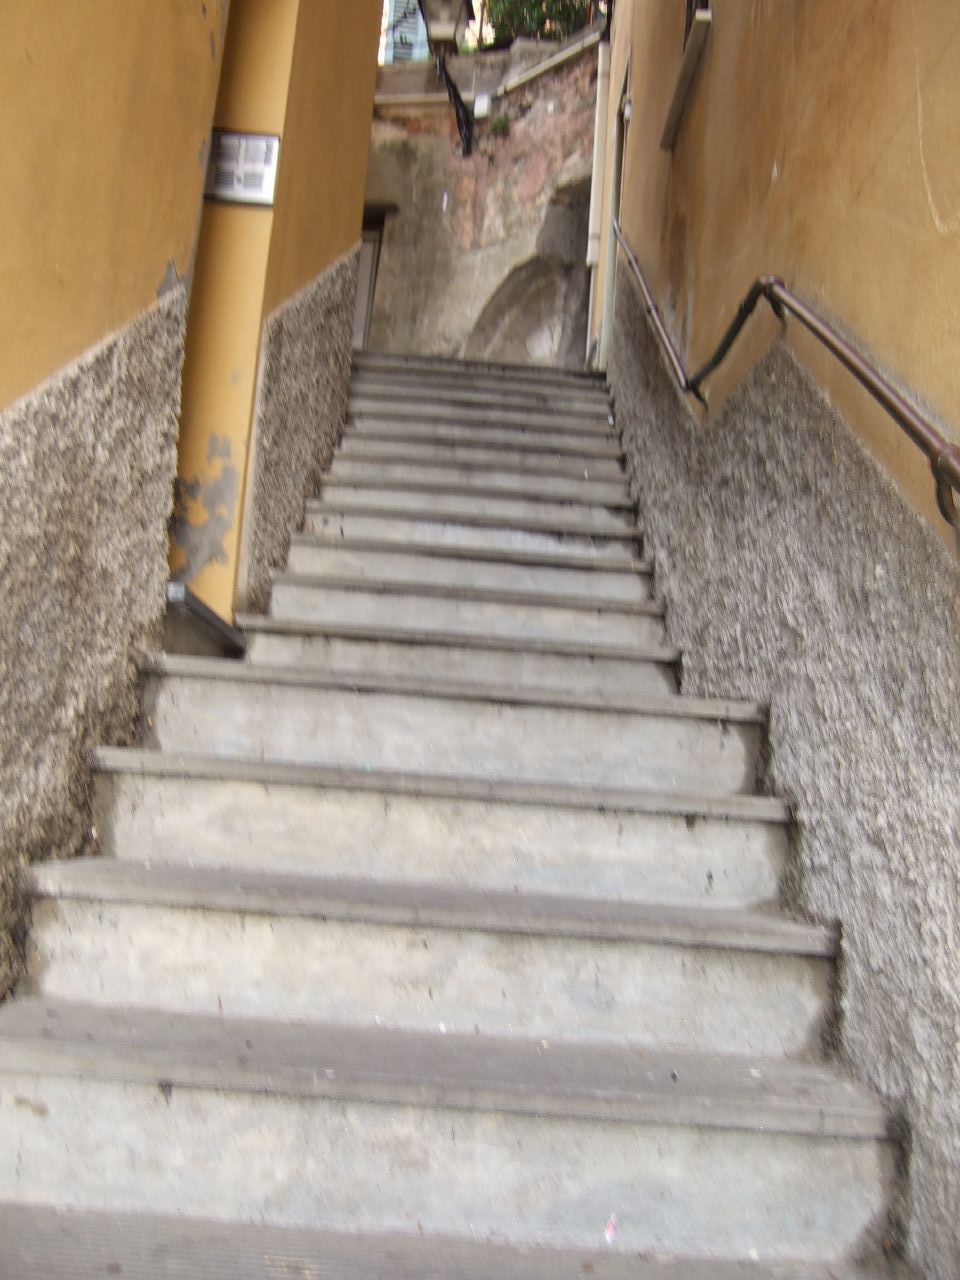 there is a set of cement stairs down that stone